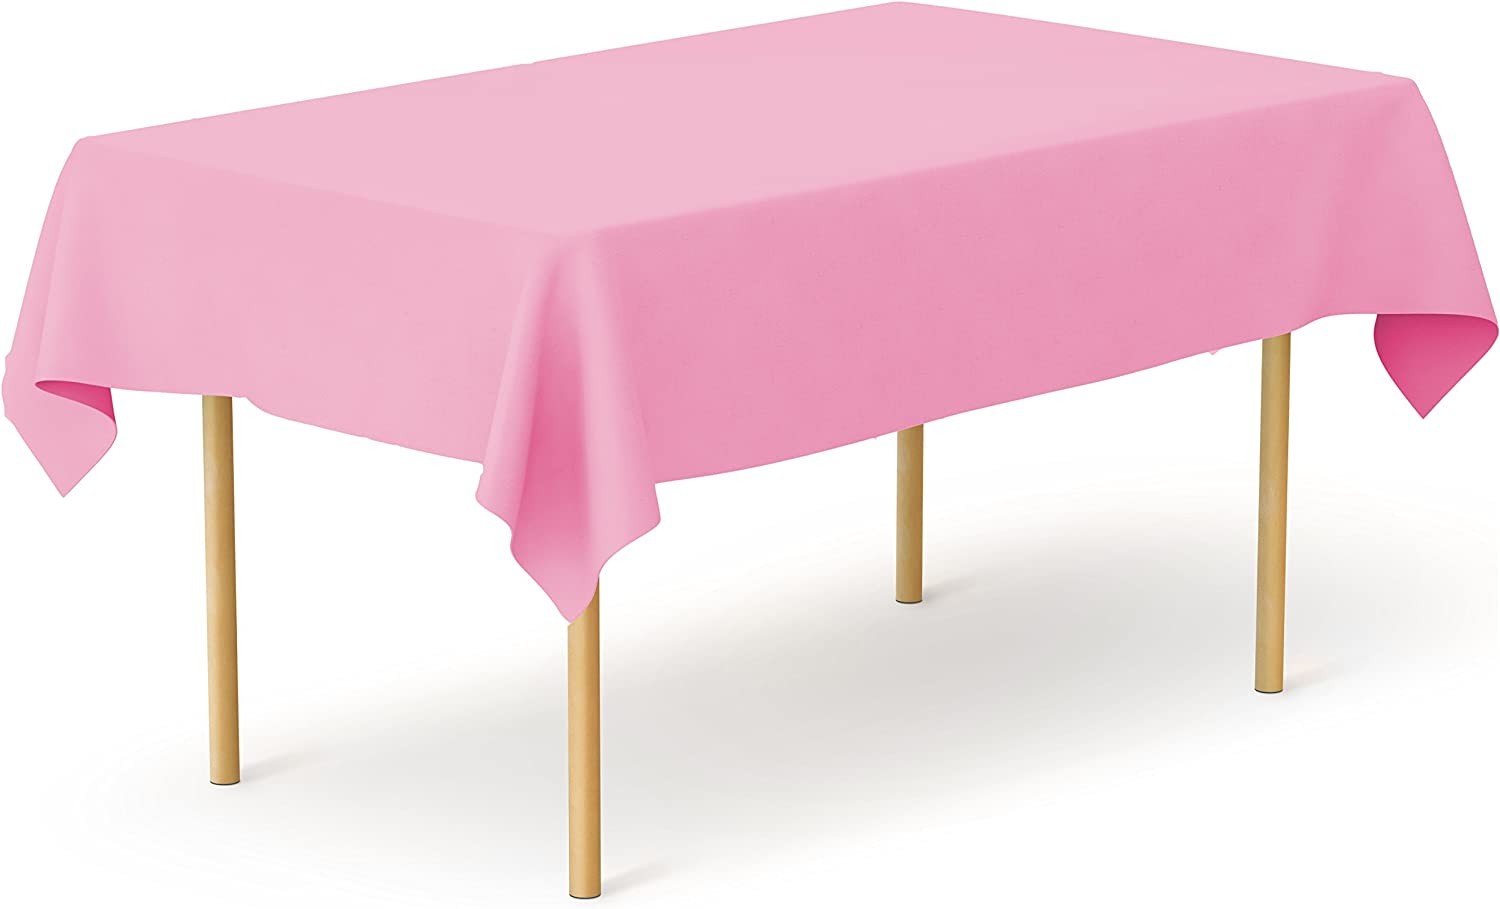 TigerChef Perfect Pink Heavy Duty Plastic Tablecloth, 54" x 108", 3/Pack